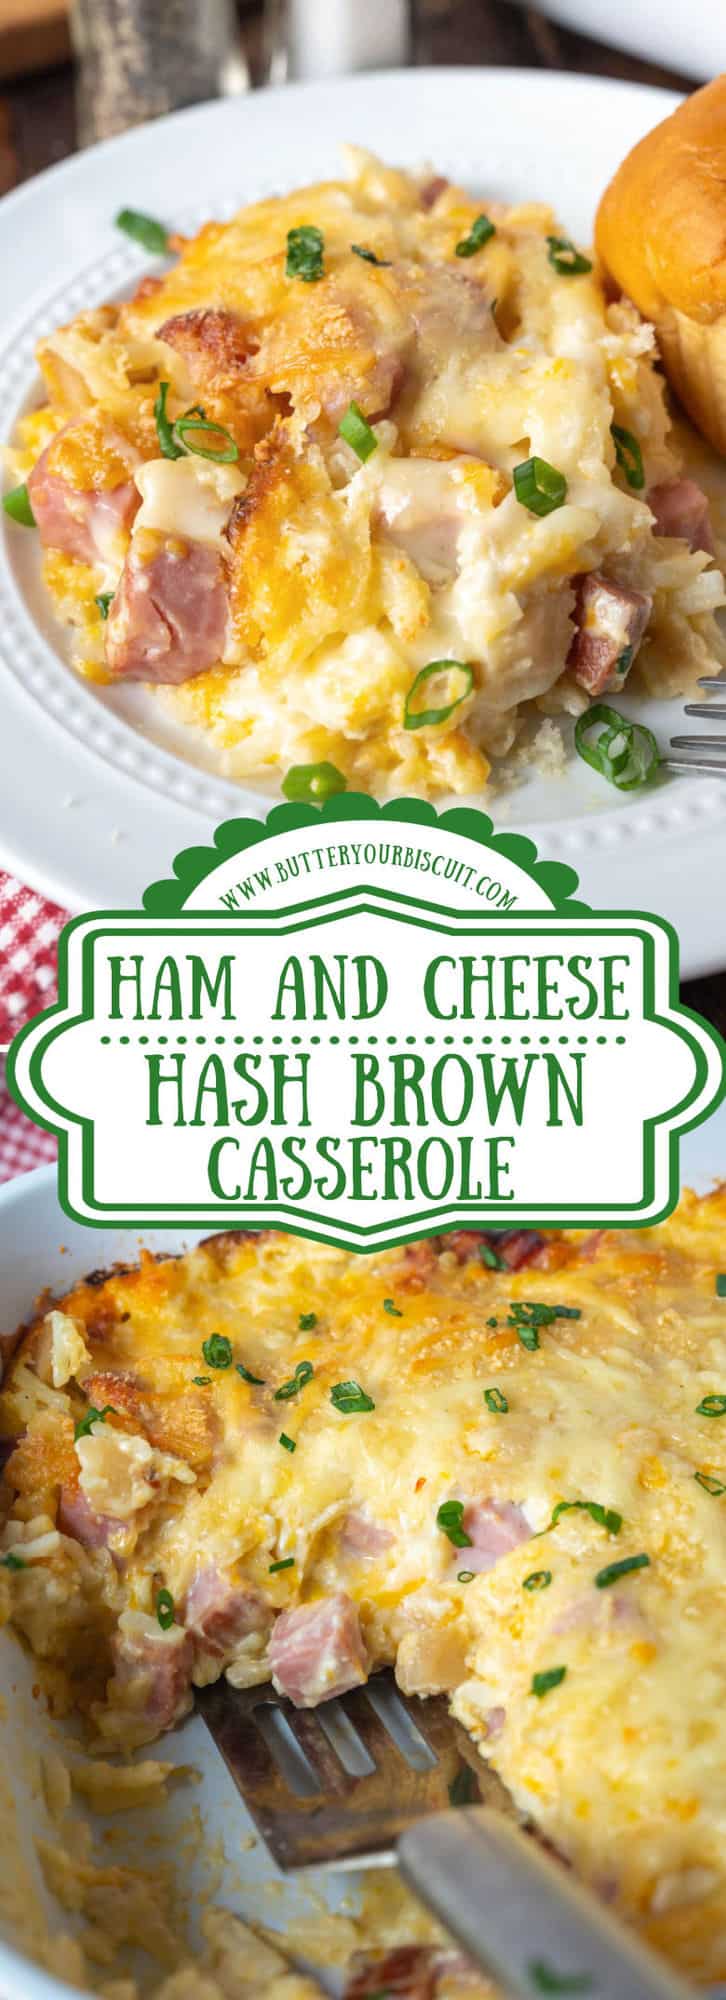 Ham and Cheese Hash Brown Casserole | Butter Your Biscuit